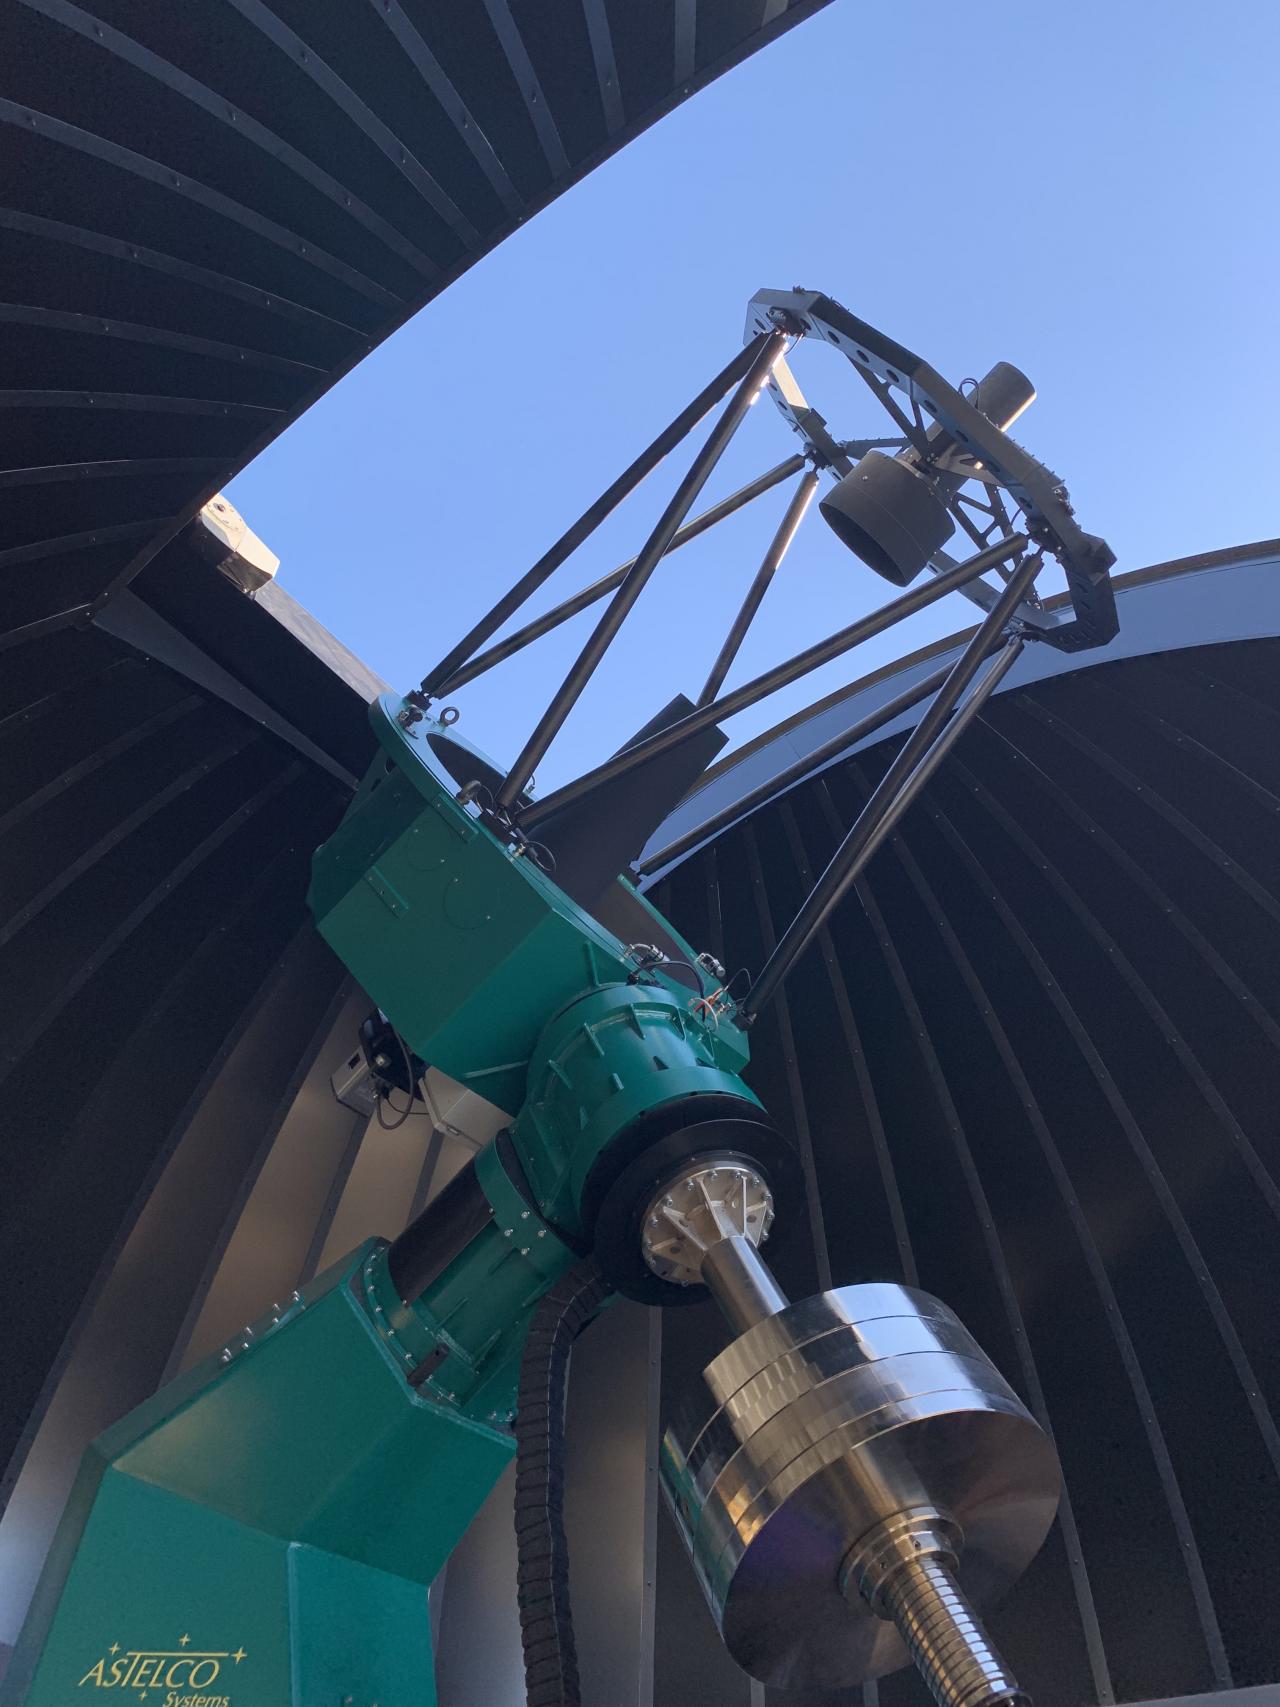 Artemis telescope, from the Speculoos network, at the Teide Observatory.